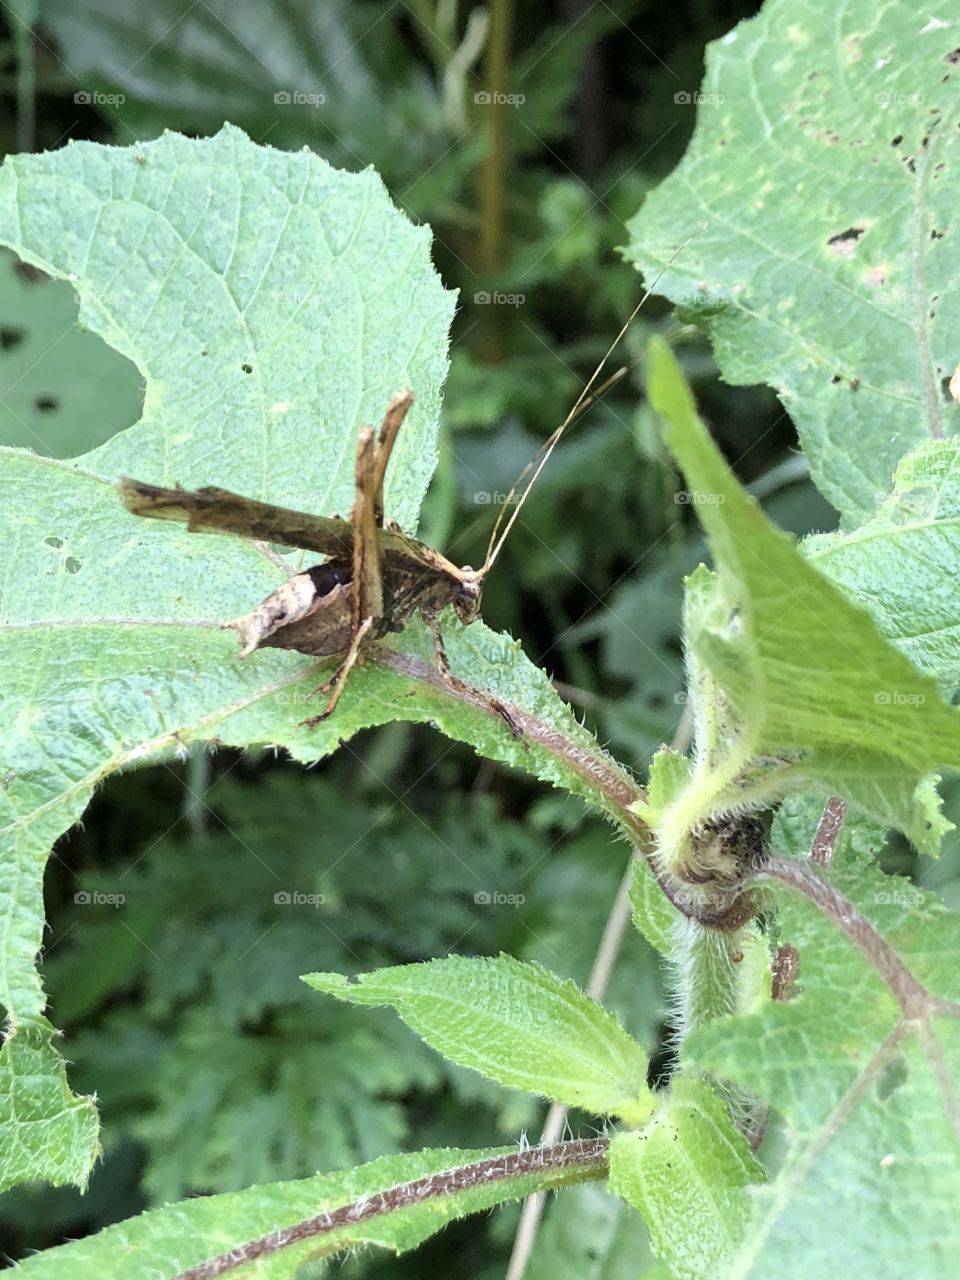 Small but devastating. This small grasshoppers alone can eat a few leaves but in groups they can eat entire crop fields. 